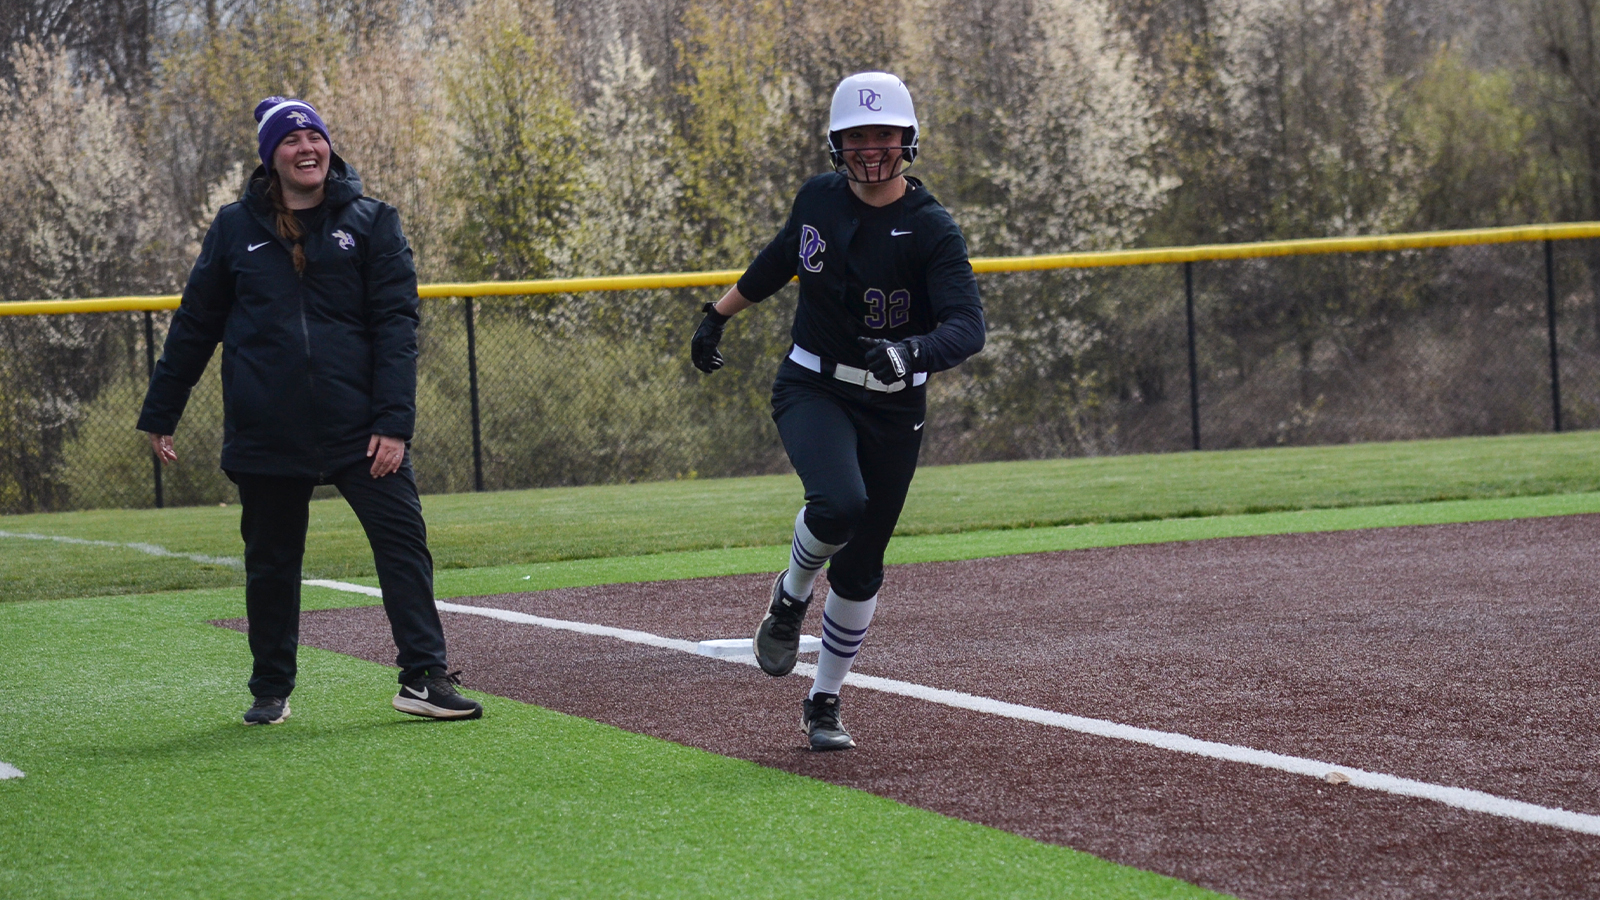 DC softball slugs out first win, splits first day at Pioneer Classic